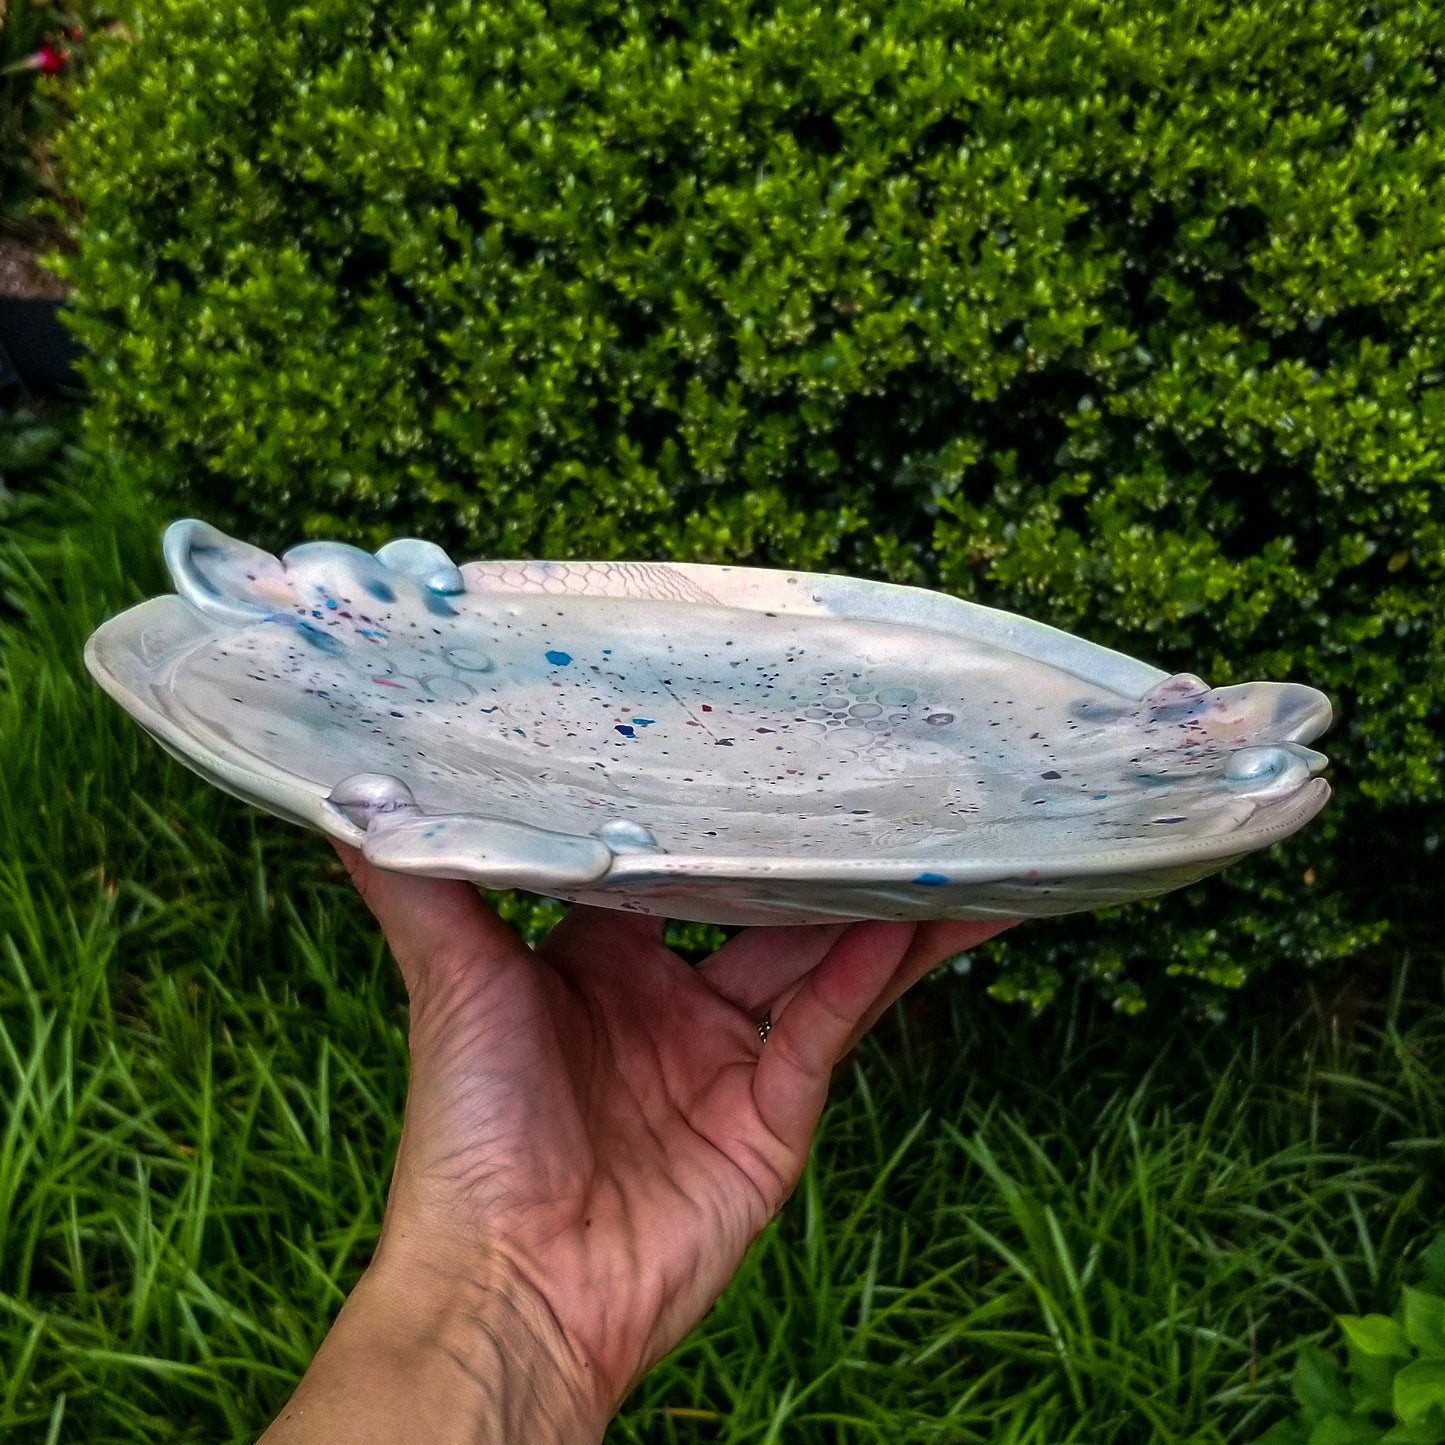 Handmade ceramic soda fired platter multi color with pressed textures